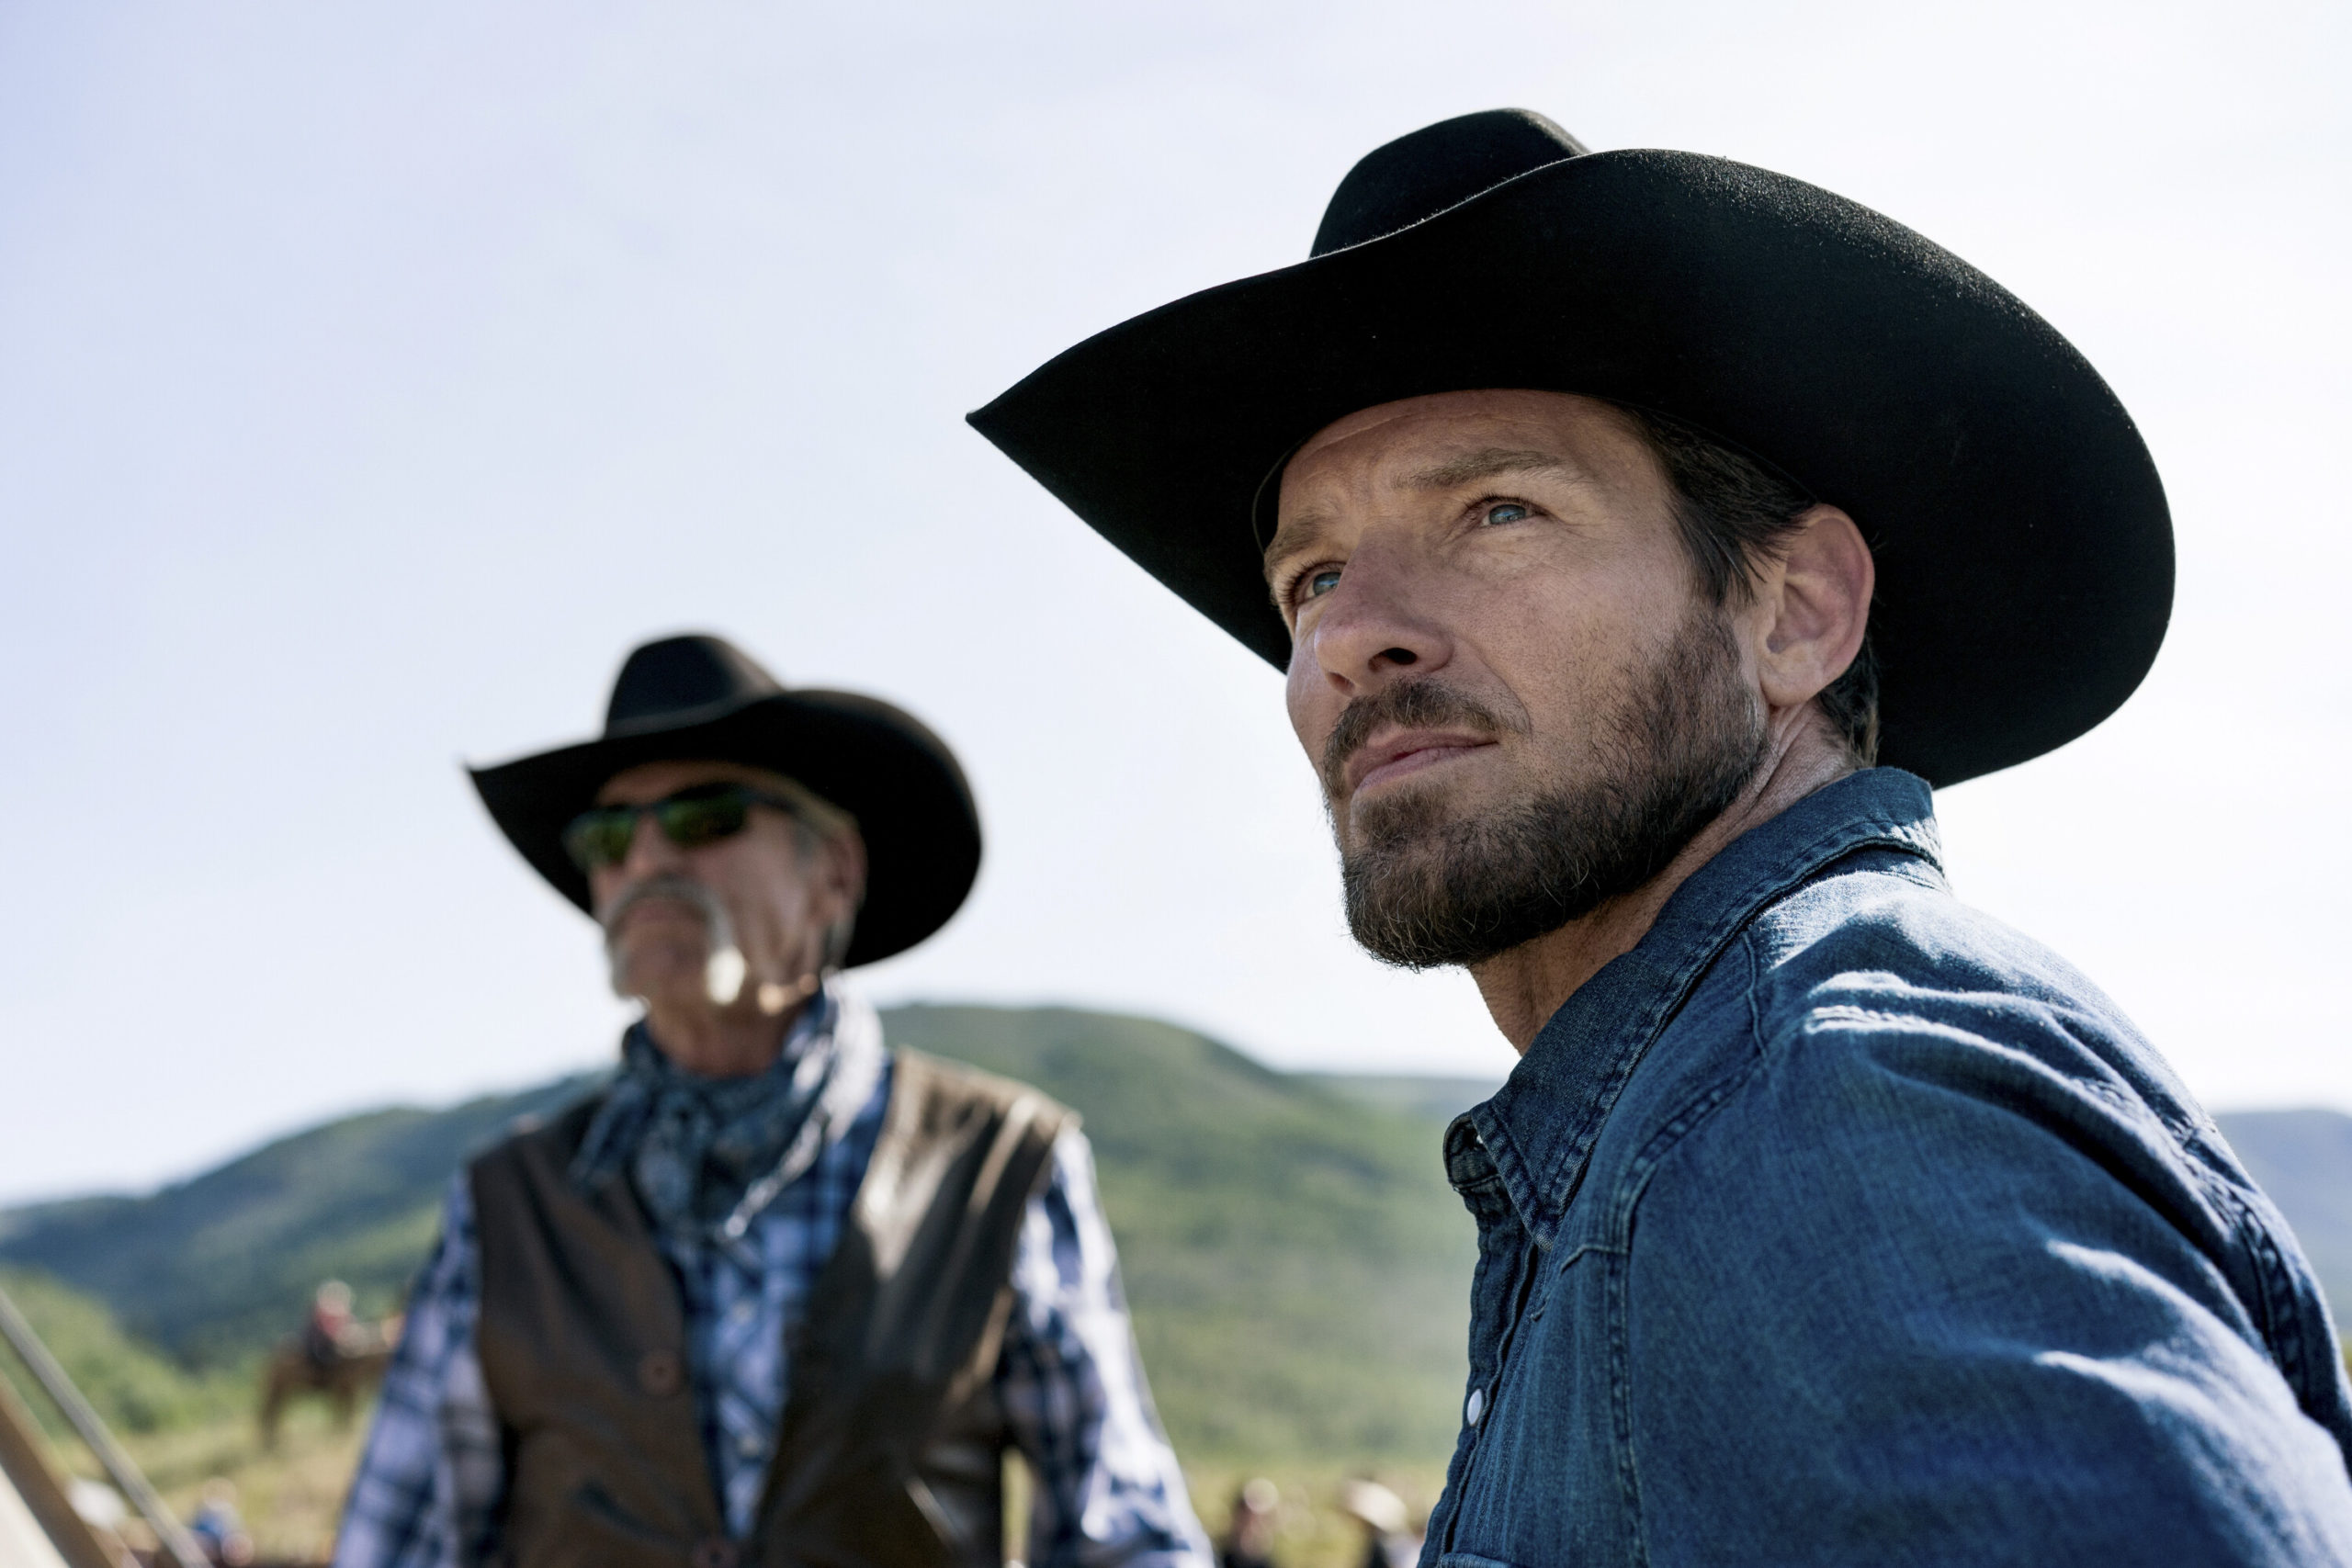 #Yellowstone: Season 5B; Ian Bohen on Production Plans for Final Episodes, Paramount Network Series Finale